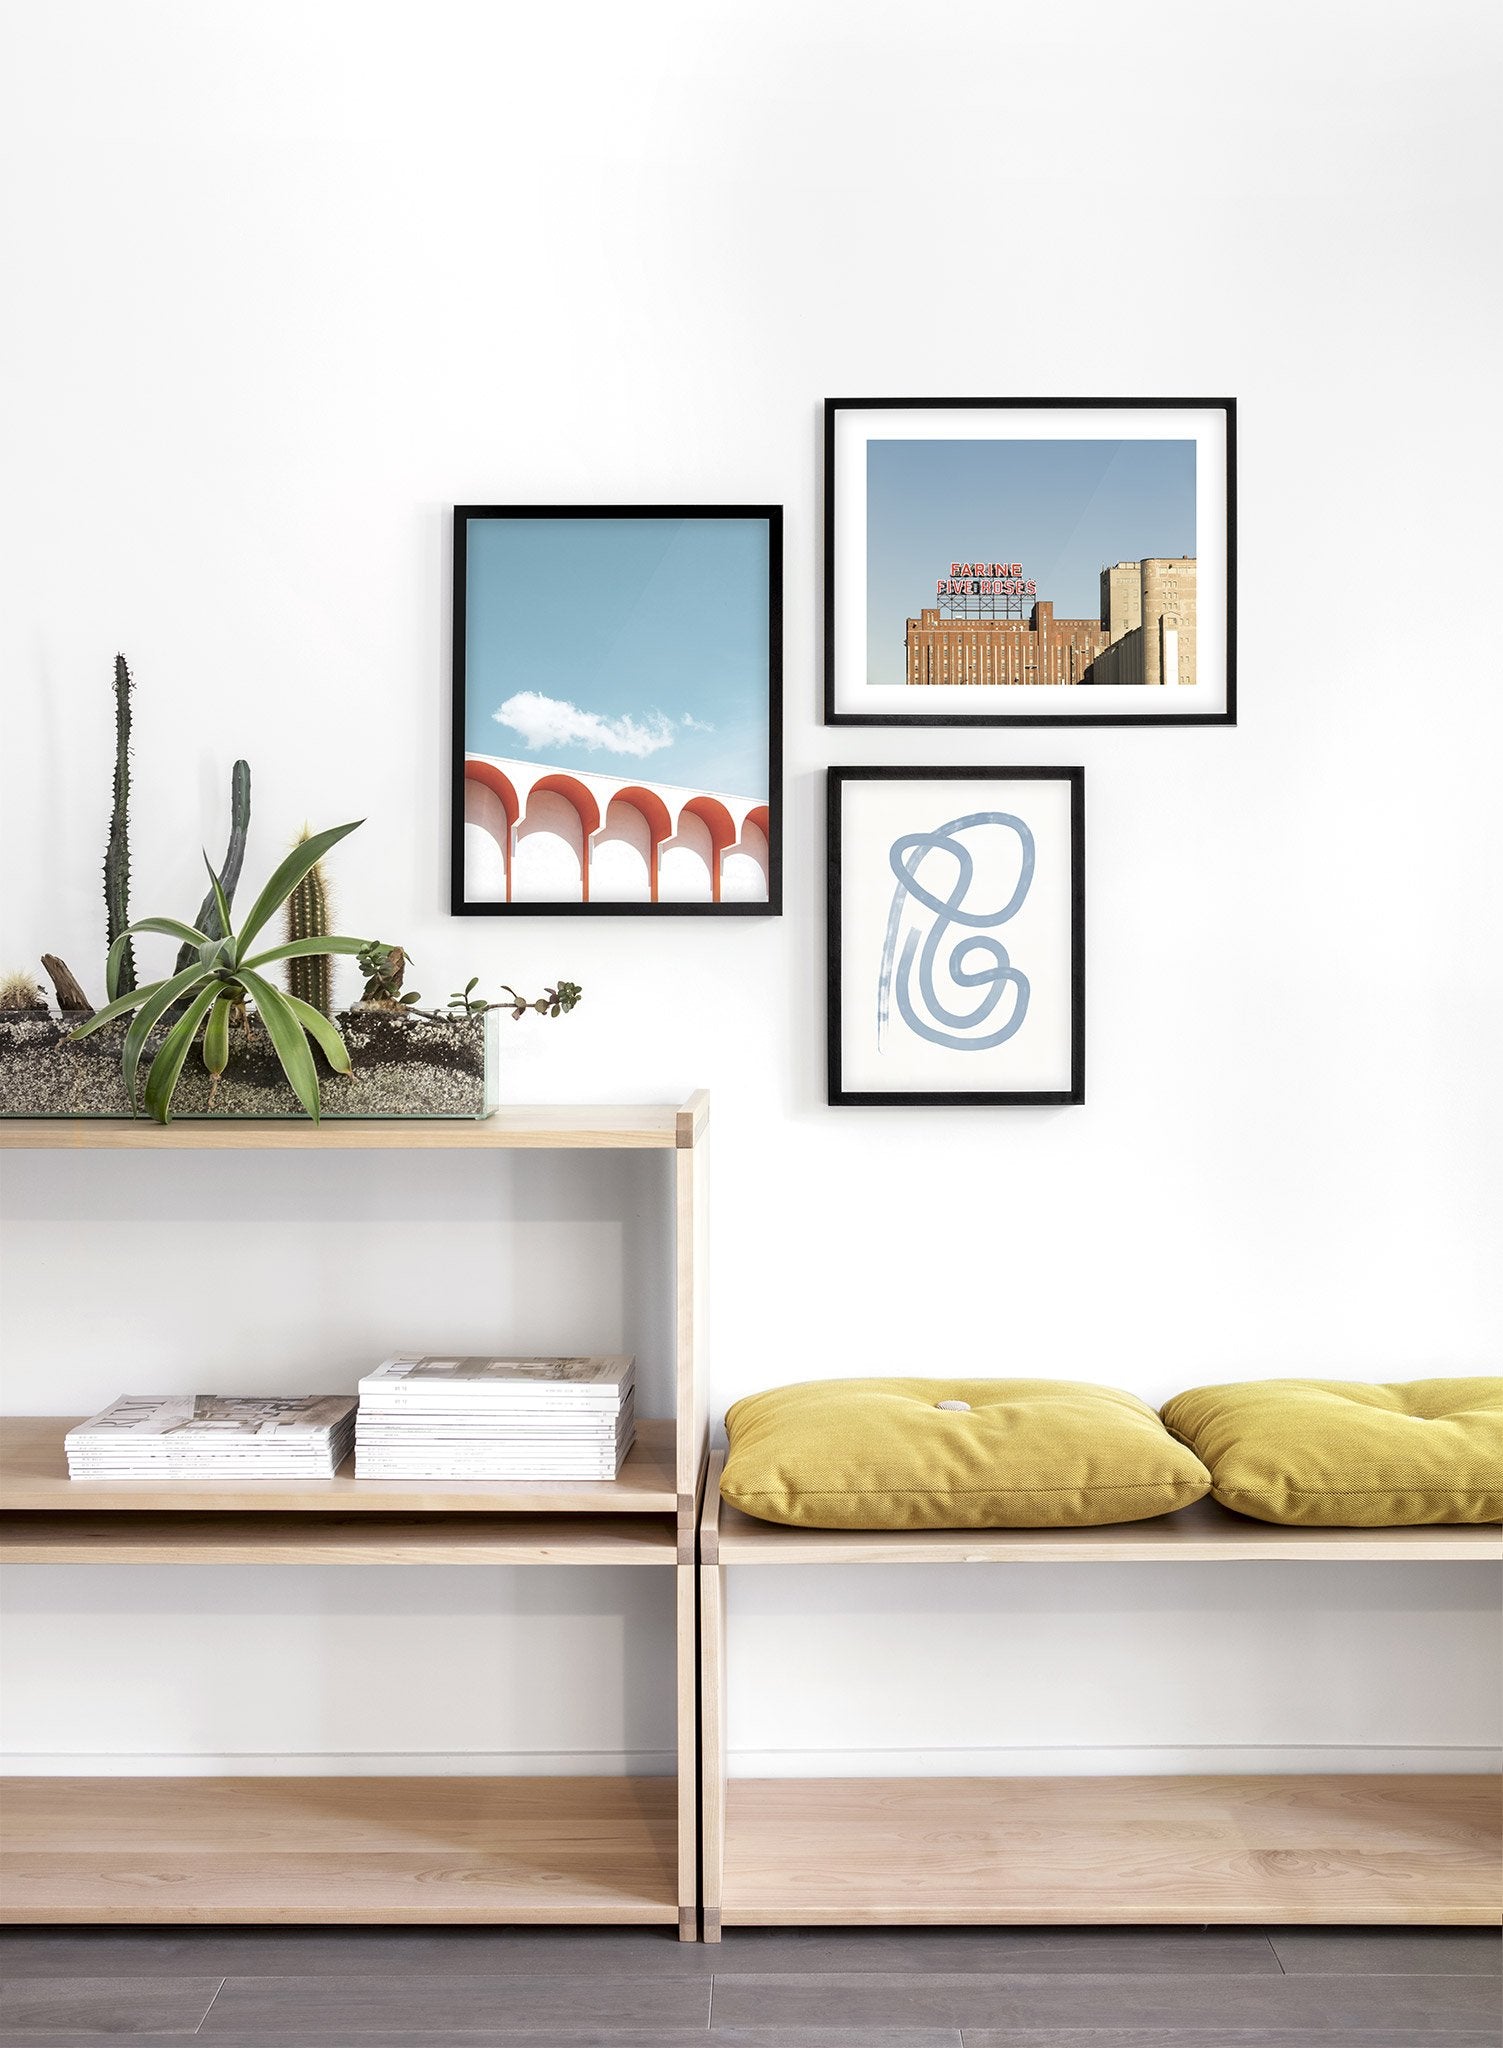 Modern minimalist poster by Opposite Wall with photography of white building with red arches - Lifestyle Trio - Living Room